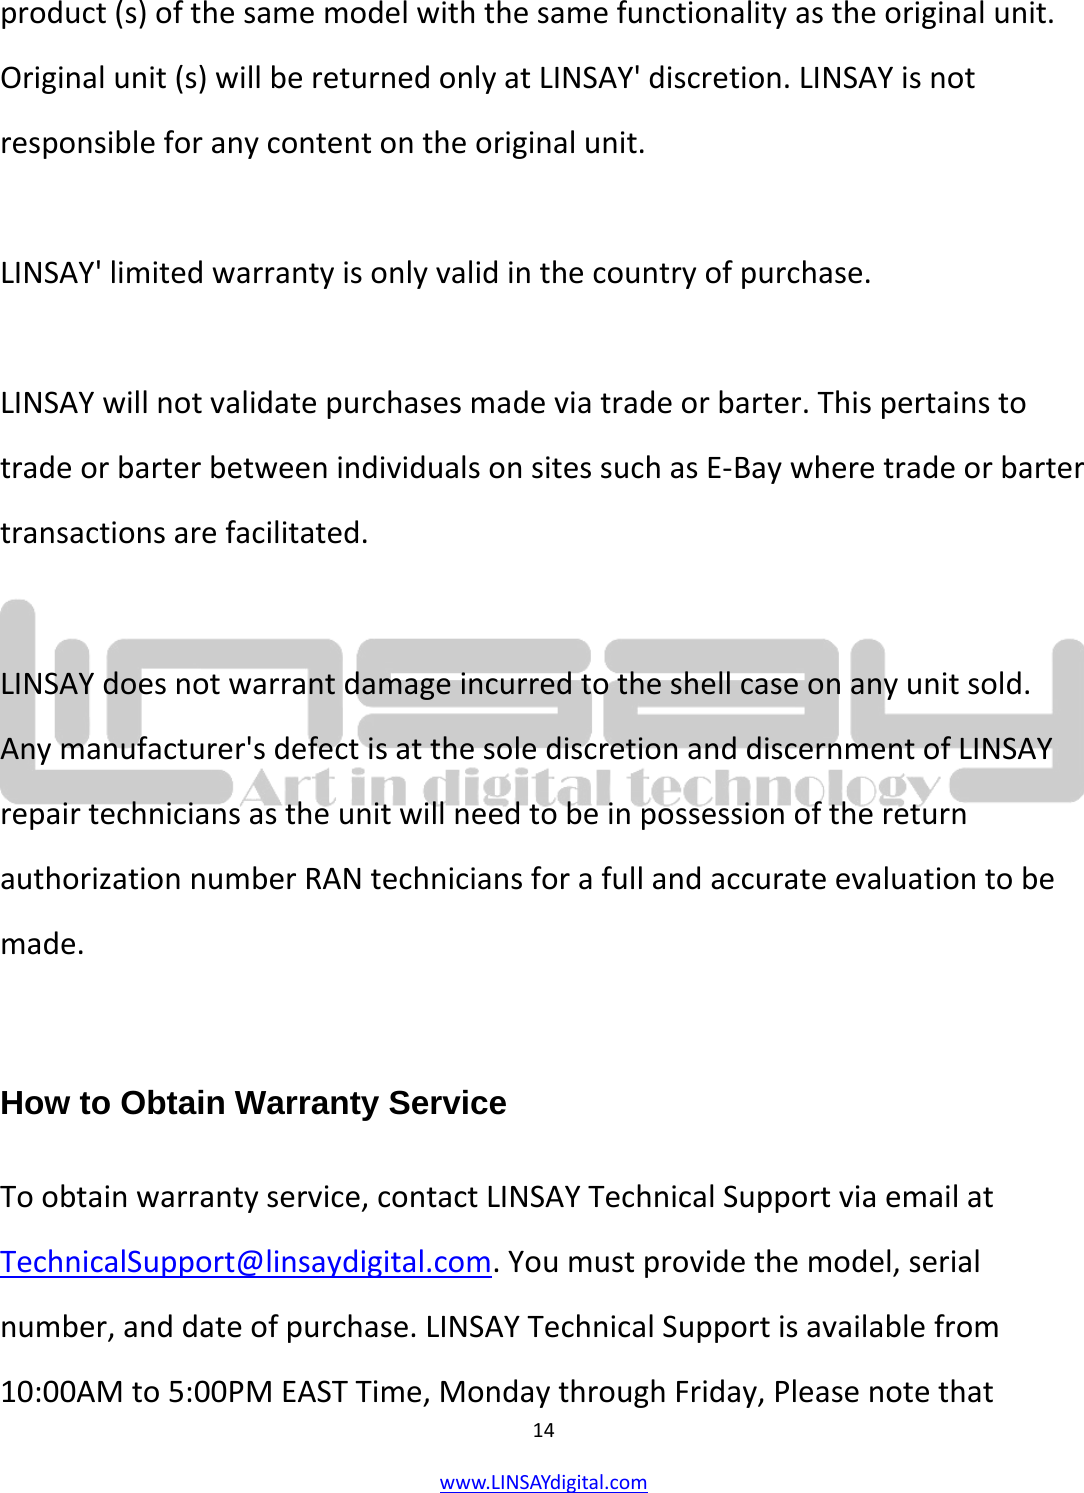  14 www.LINSAYdigital.com   product (s) of the same model with the same functionality as the original unit. Original unit (s) will be returned only at LINSAY&apos; discretion. LINSAY is not responsible for any content on the original unit.  LINSAY&apos; limited warranty is only valid in the country of purchase.  LINSAY will not validate purchases made via trade or barter. This pertains to trade or barter between individuals on sites such as E-Bay where trade or barter transactions are facilitated.  LINSAY does not warrant damage incurred to the shell case on any unit sold. Any manufacturer&apos;s defect is at the sole discretion and discernment of LINSAY repair technicians as the unit will need to be in possession of the return authorization number RAN technicians for a full and accurate evaluation to be made.  How to Obtain Warranty Service To obtain warranty service, contact LINSAY Technical Support via email at TechnicalSupport@linsaydigital.com. You must provide the model, serial number, and date of purchase. LINSAY Technical Support is available from 10:00AM to 5:00PM EAST Time, Monday through Friday, Please note that 